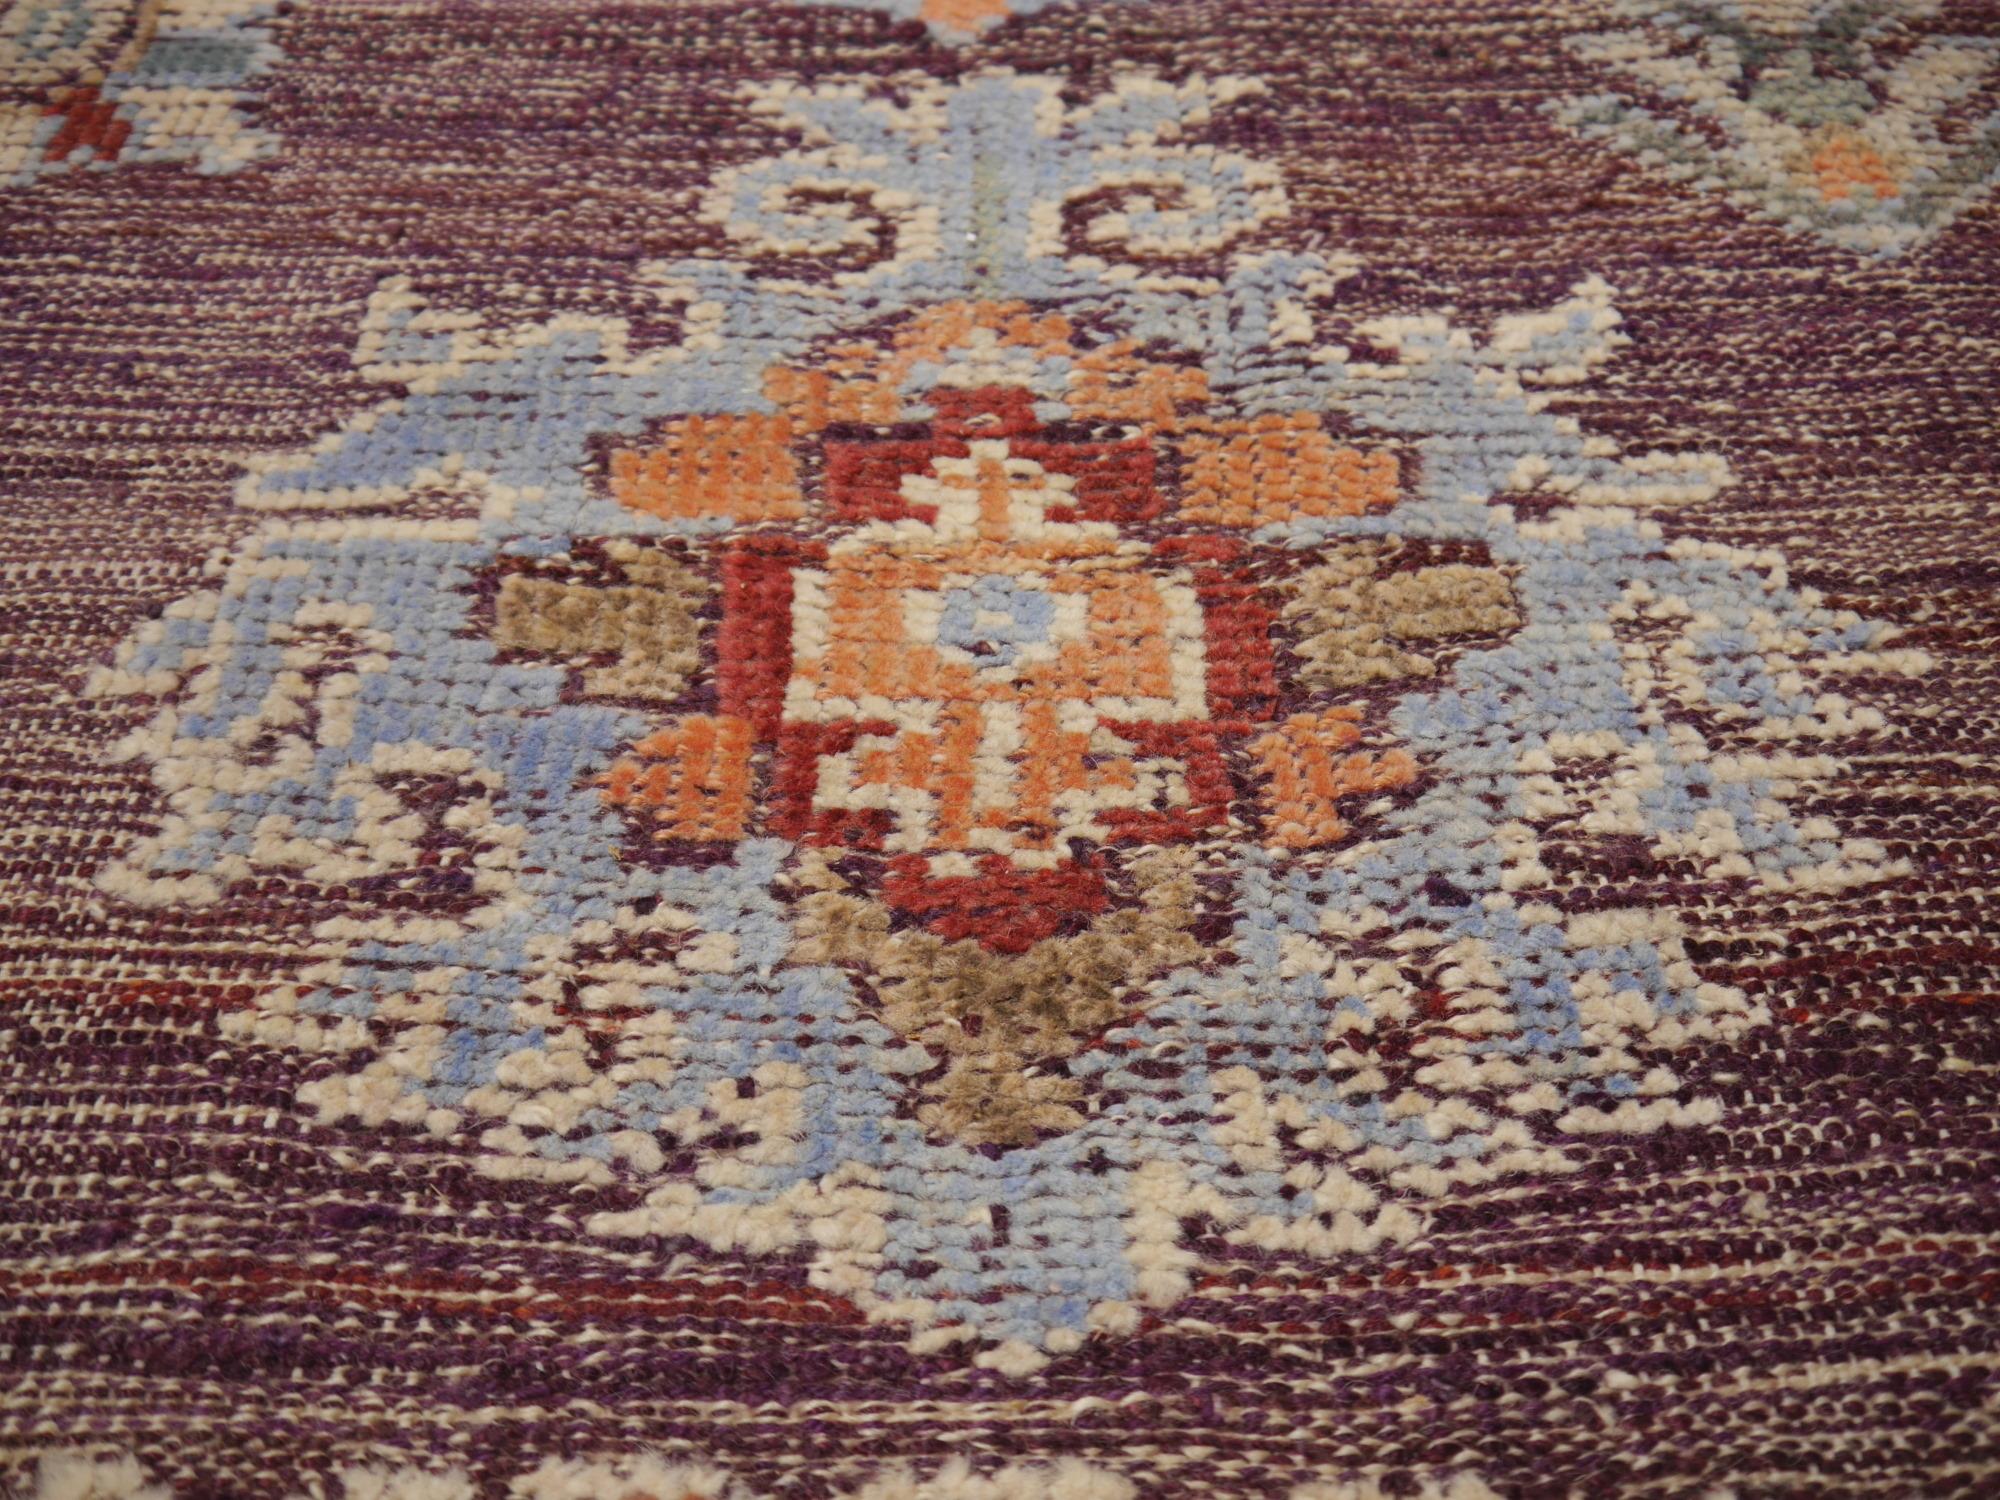 A large room sized rug with design in style of Oushak.
This beautiful rug was handmade using two different styles. The background is flat-woven Kilim and the motives are hand knotted. This results a special rustic look. The purple color is